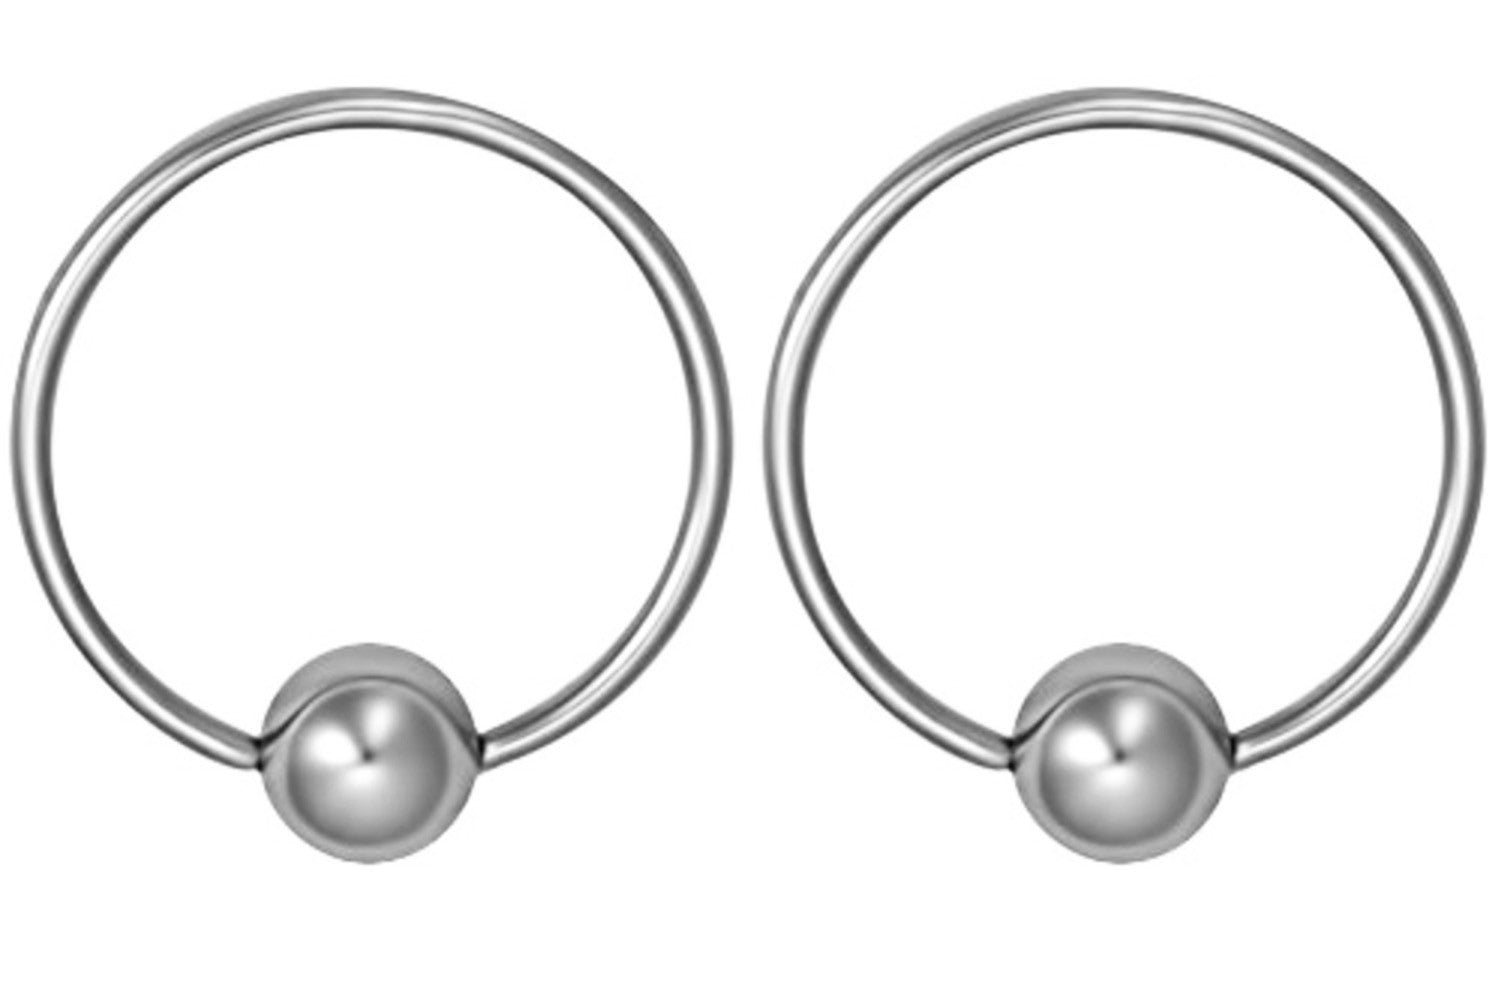 These 20 gauge rings are hypoallergenic and nickel free. They can be worn in a variety of 20 gauge body piercings.